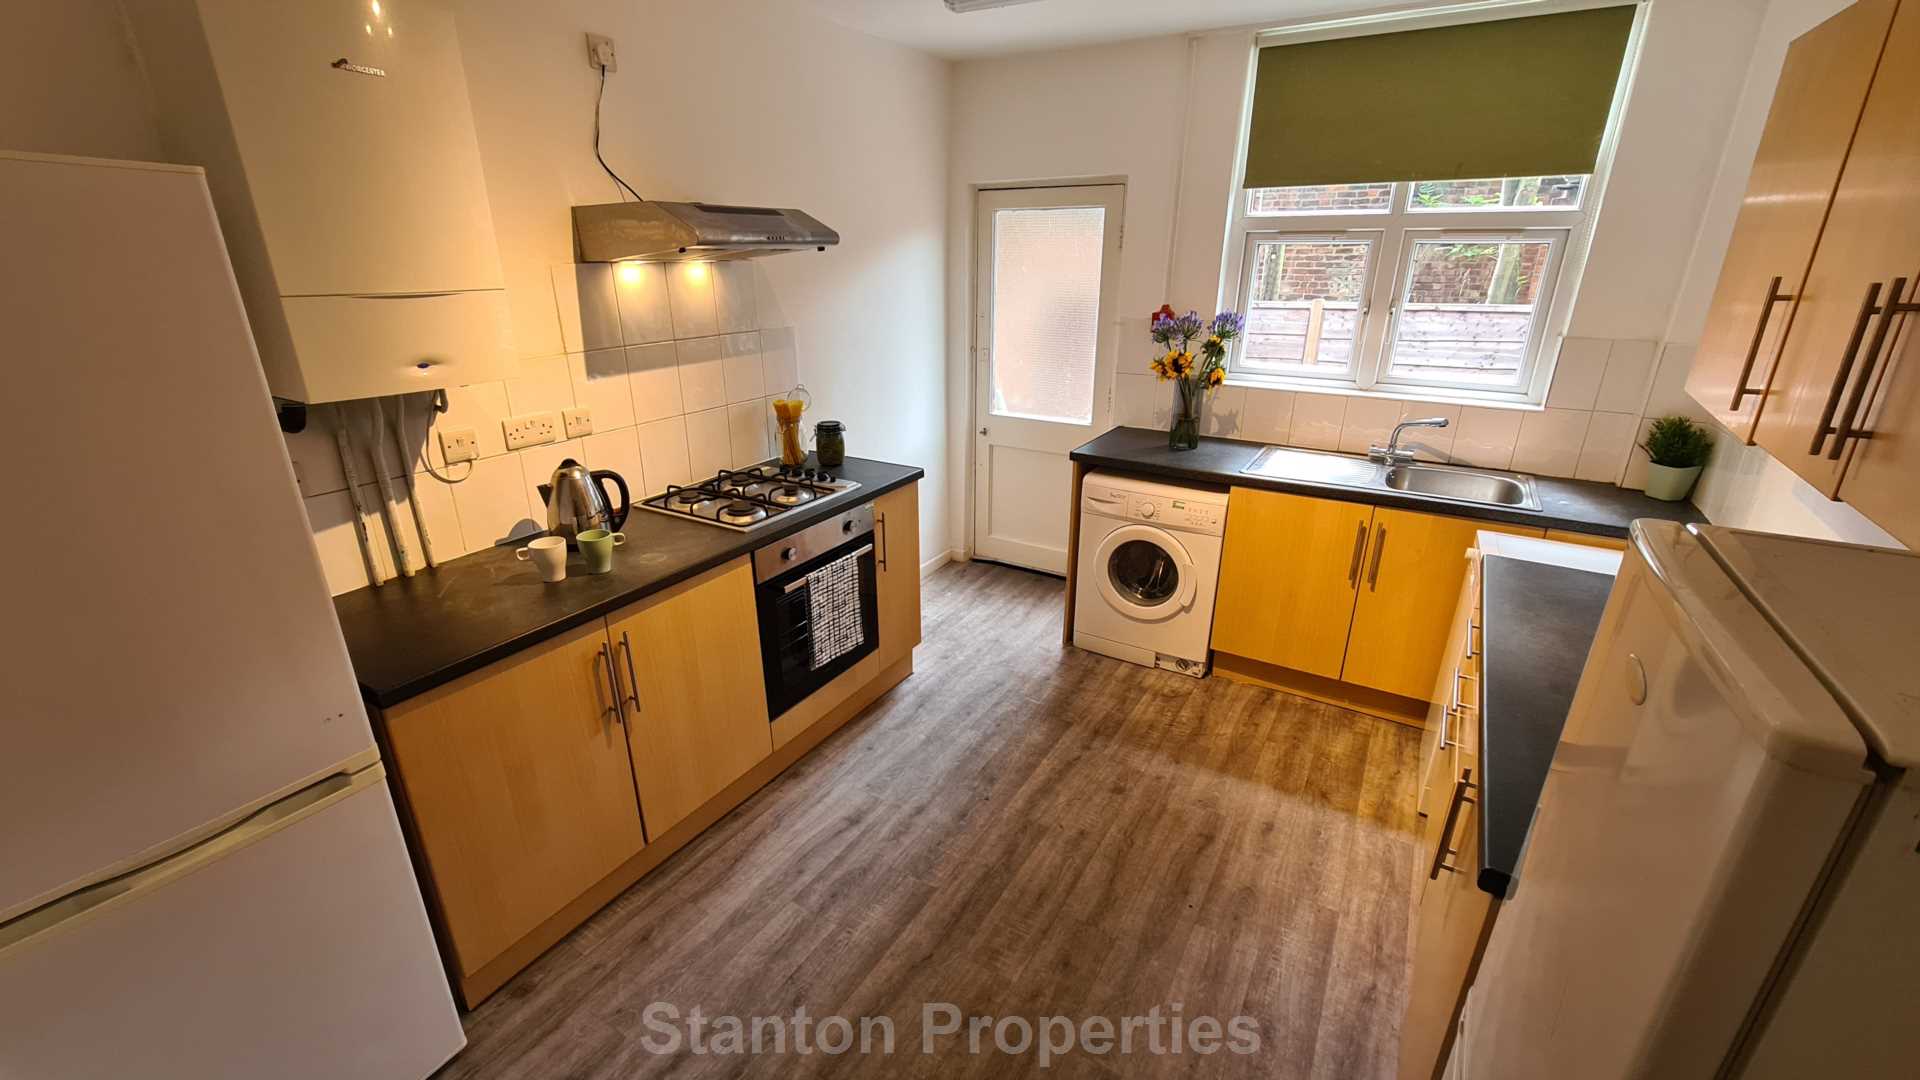 £137 pppw, See Video Tour, Lombard Grove, Fallowfield, Image 5